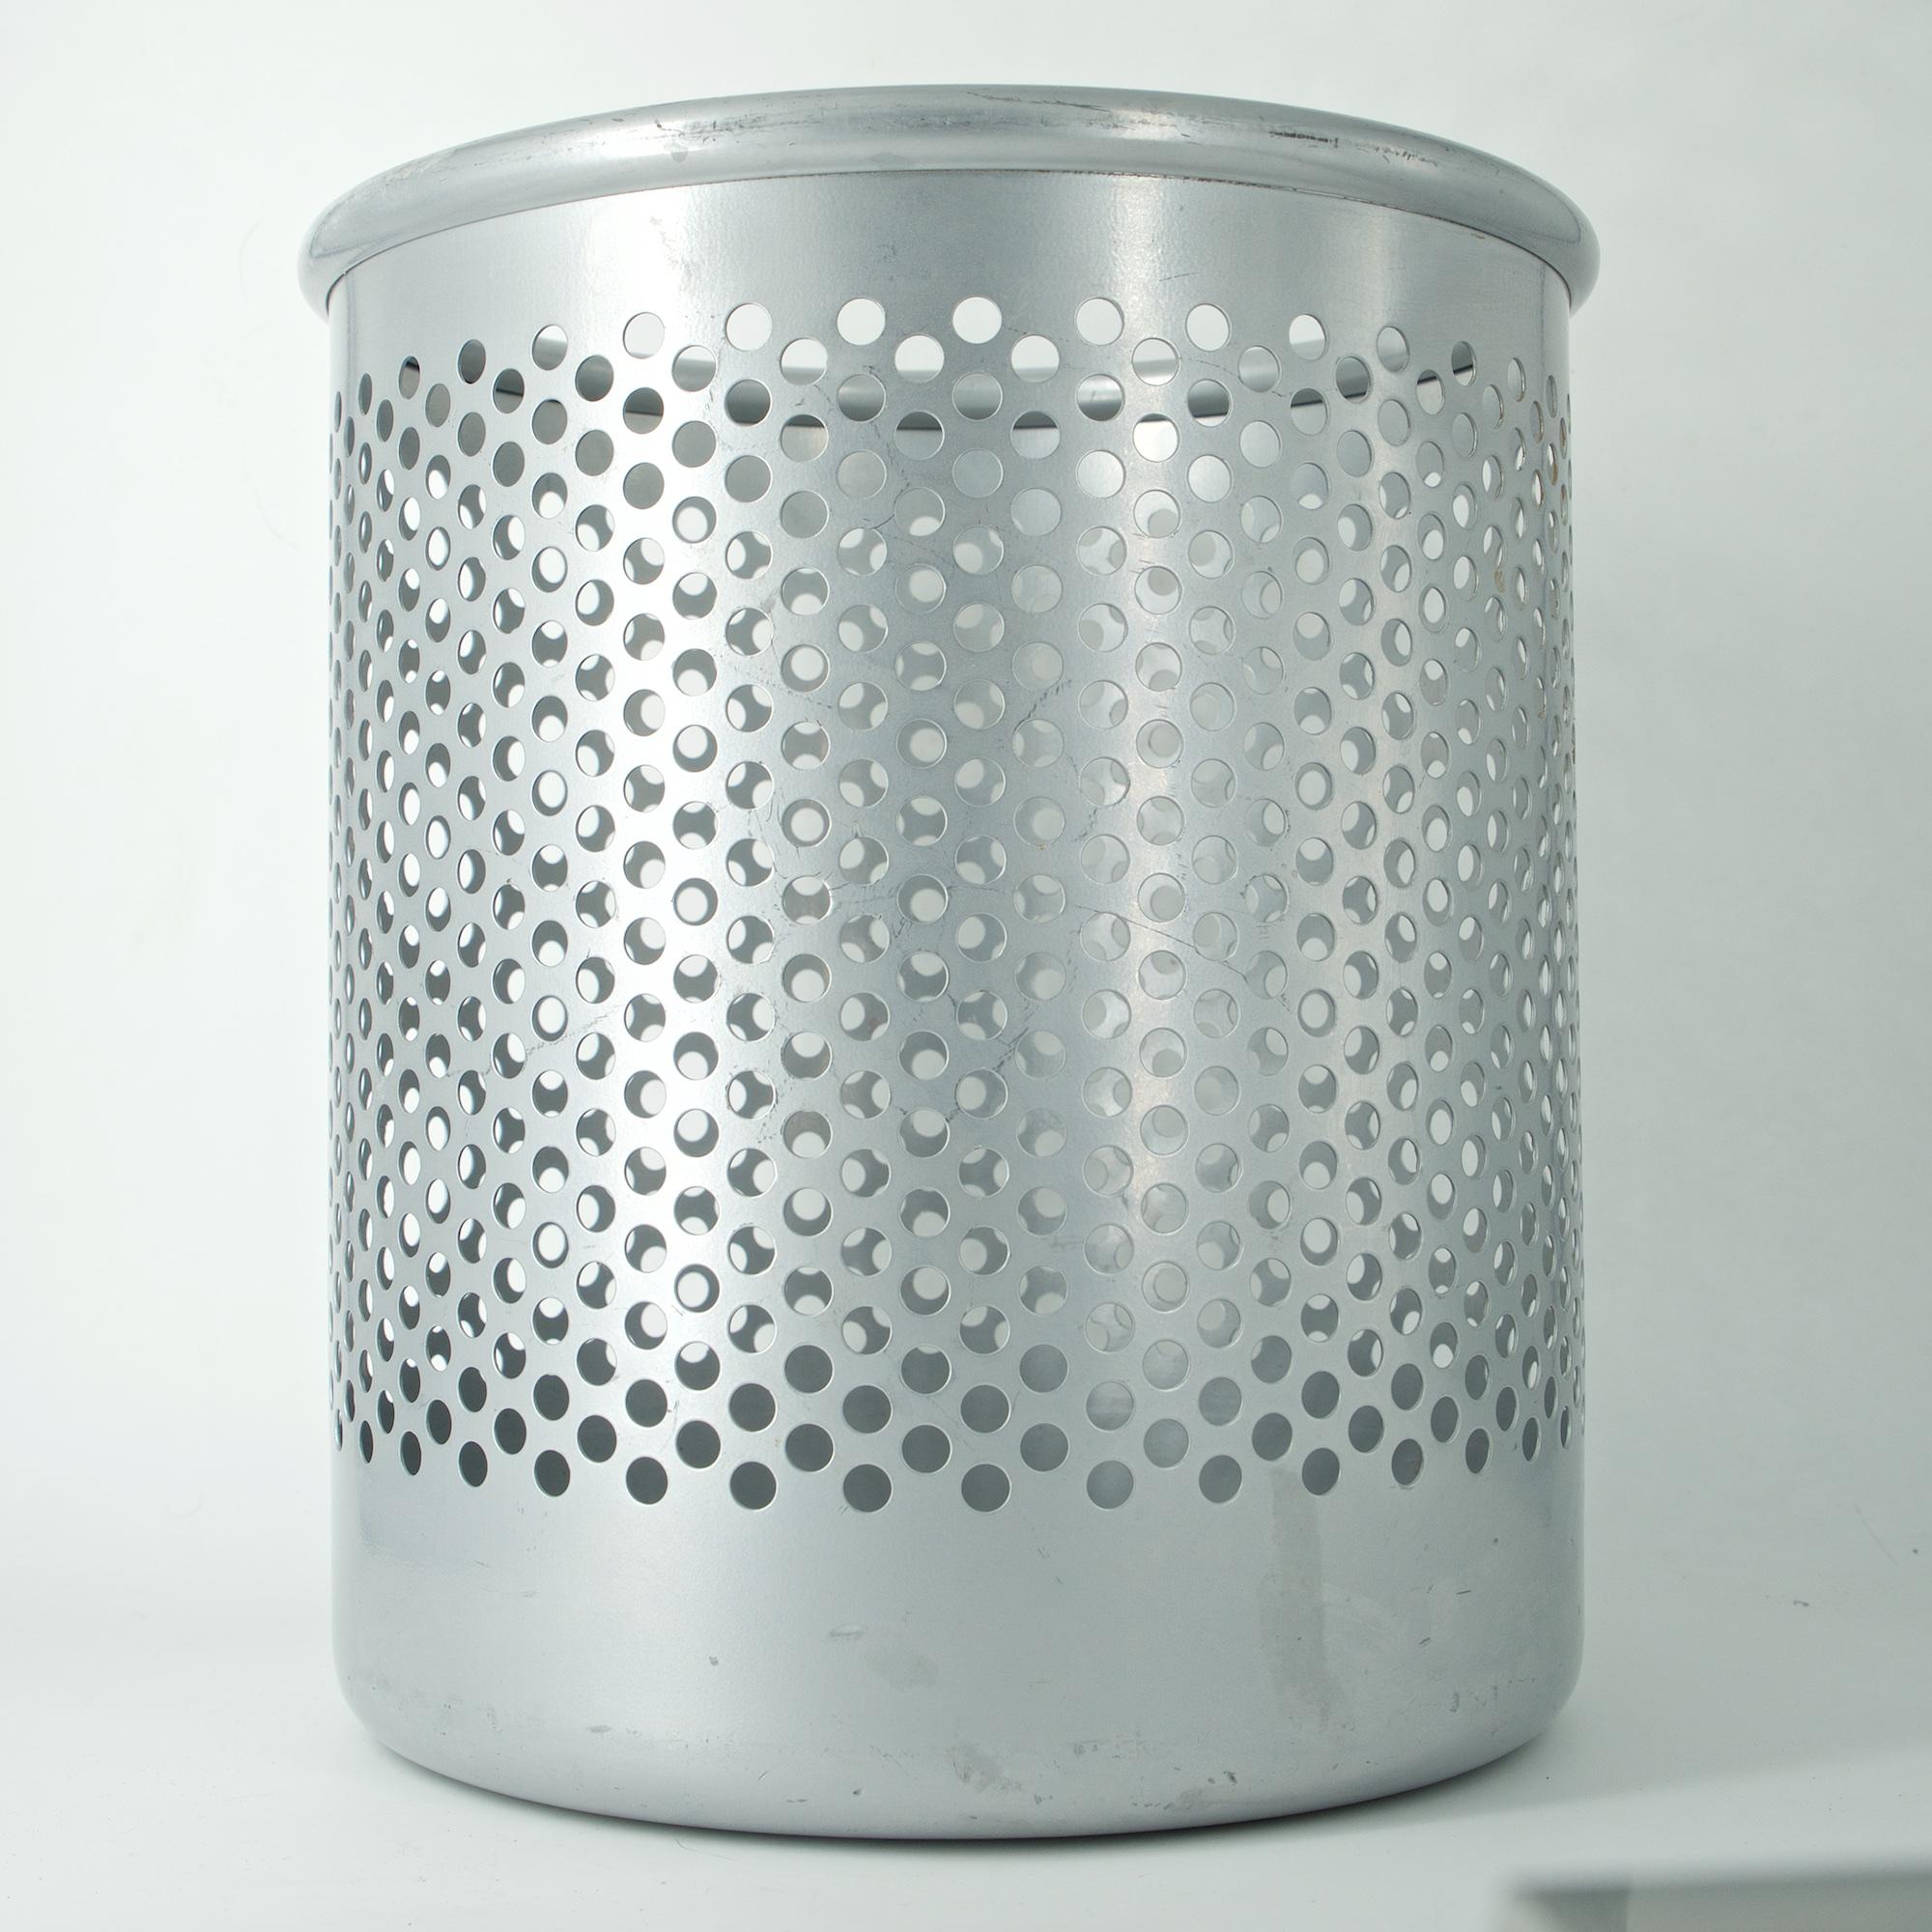 Enameled Grey Perforated Metal Office Wastebasket Trash Can Italy Memphis Sottsass OSX